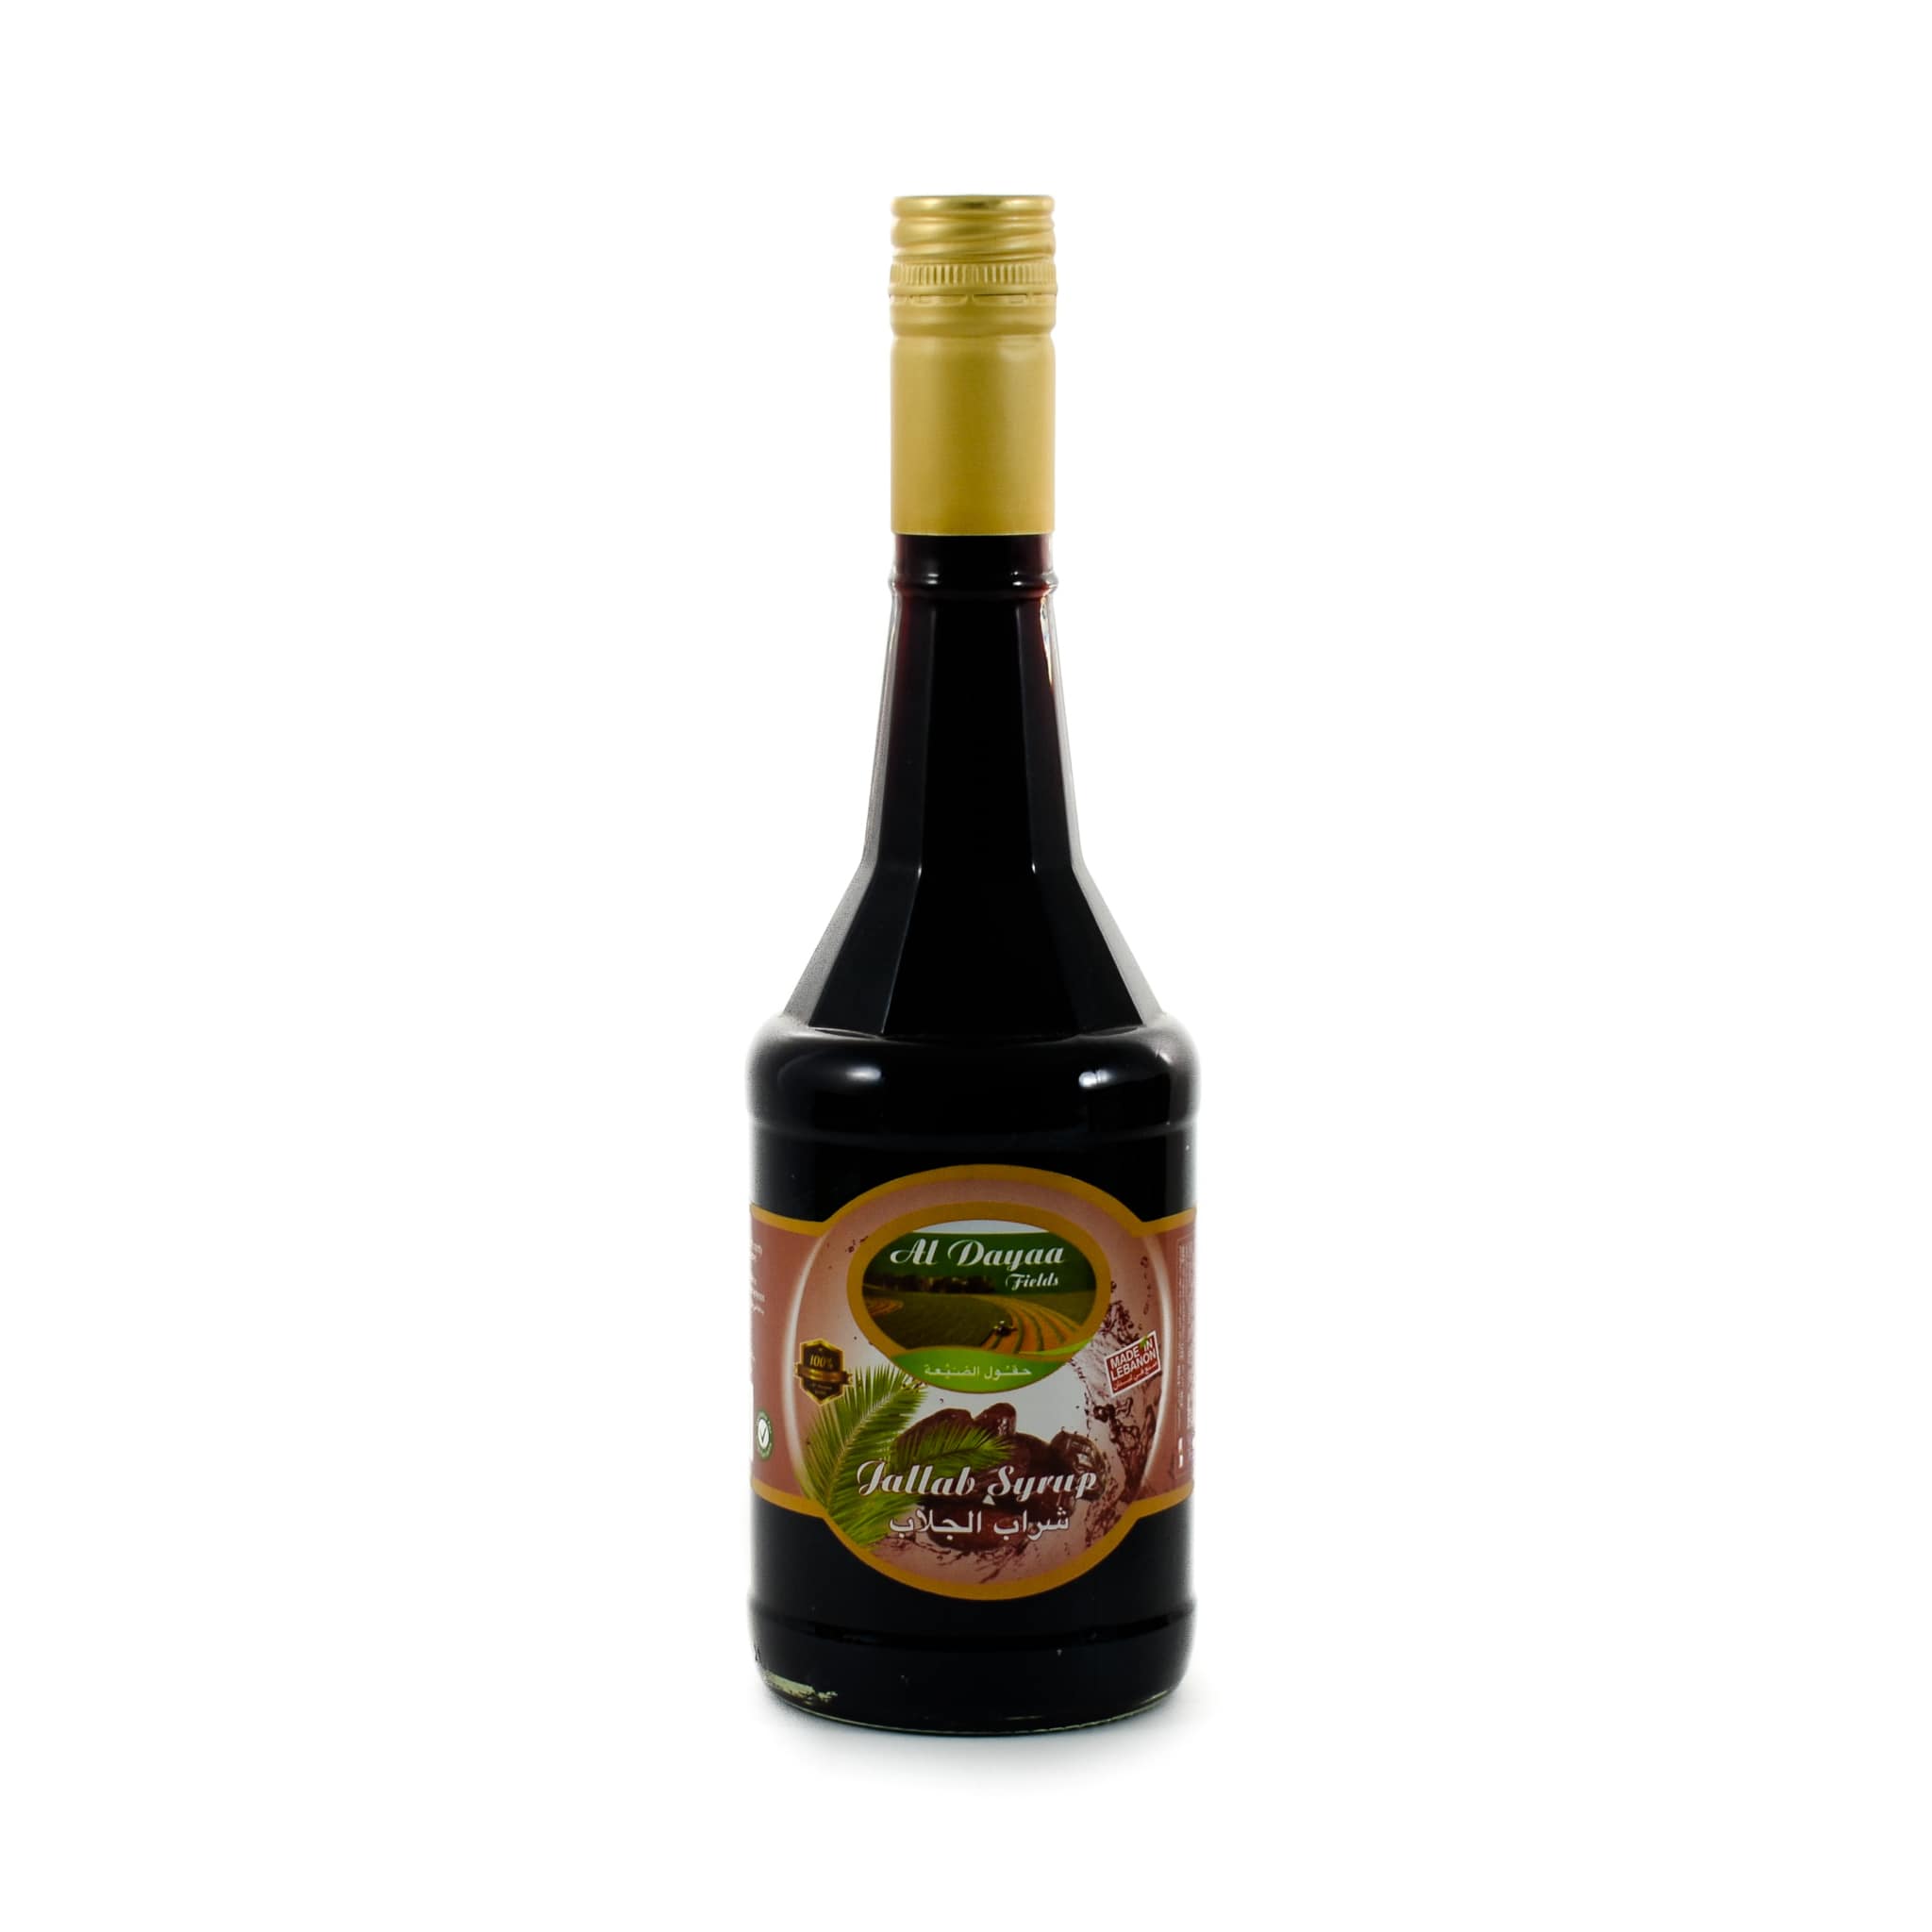 Jallab Syrup 600ml